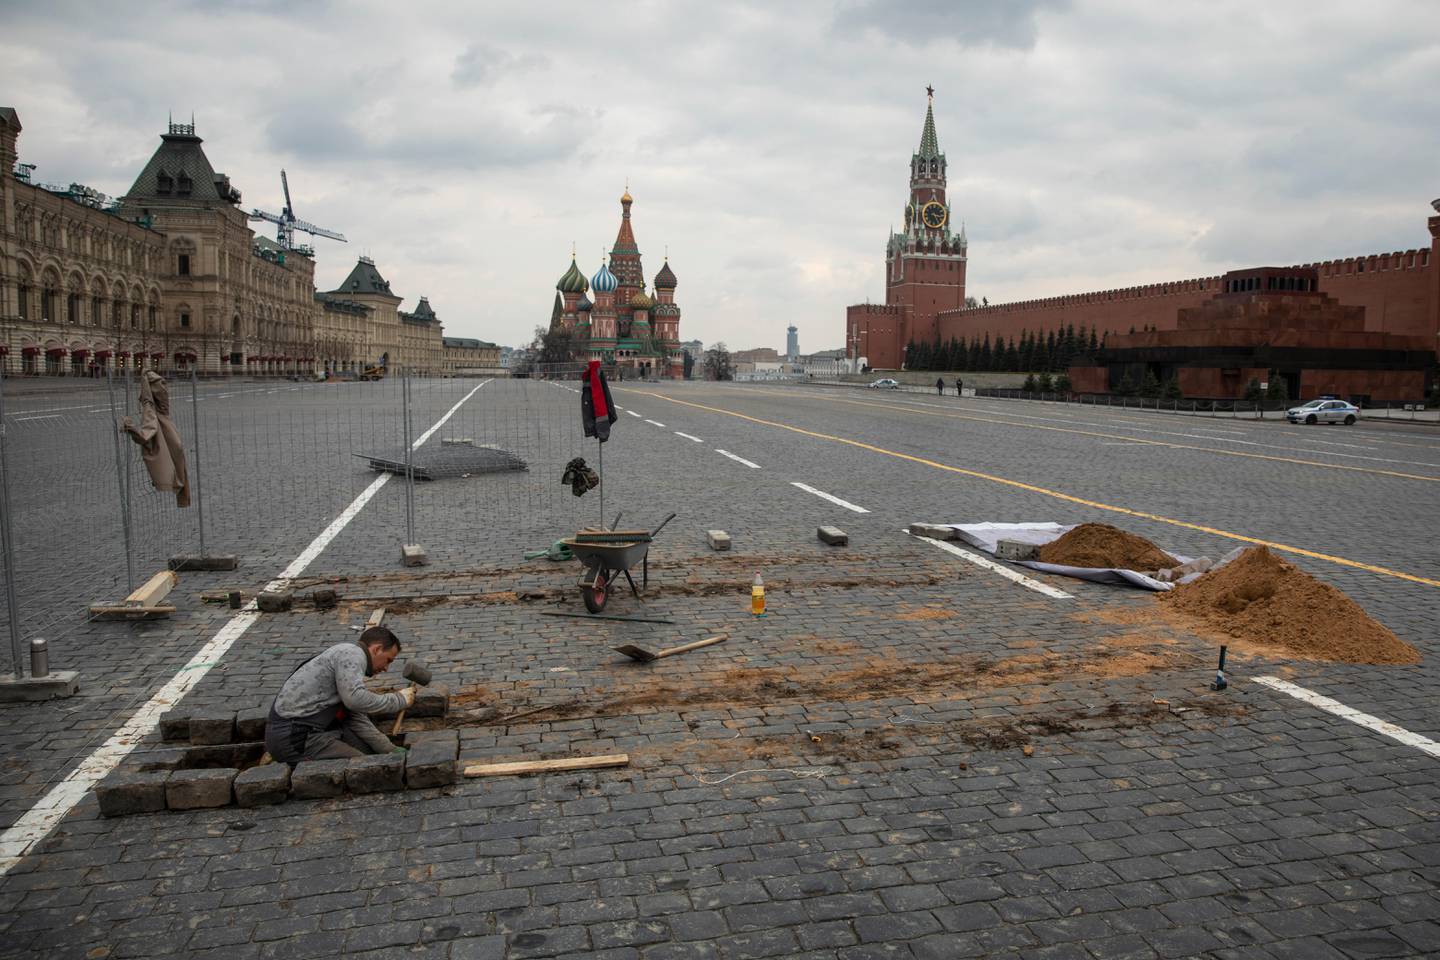 A worker fixes paving stones in emptied Red Square, with St. Basil's Cathedral, center, and Kremlin's Spasskaya Tower, right, in the background, in Moscow, Russia, Wednesday, April 8, 2020. The Russian capital has woken up to a lockdown obliging most people in the city of 13 million to stay home. The government ordered other regions of the vast country to quickly prepare for the same as Moscow, to stem the spread of the new coronavirus. The new coronavirus causes mild or moderate symptoms for most people, but for some, especially older adults and people with existing health problems, it can cause more severe illness or death. (AP Photo/Pavel Golovkin)